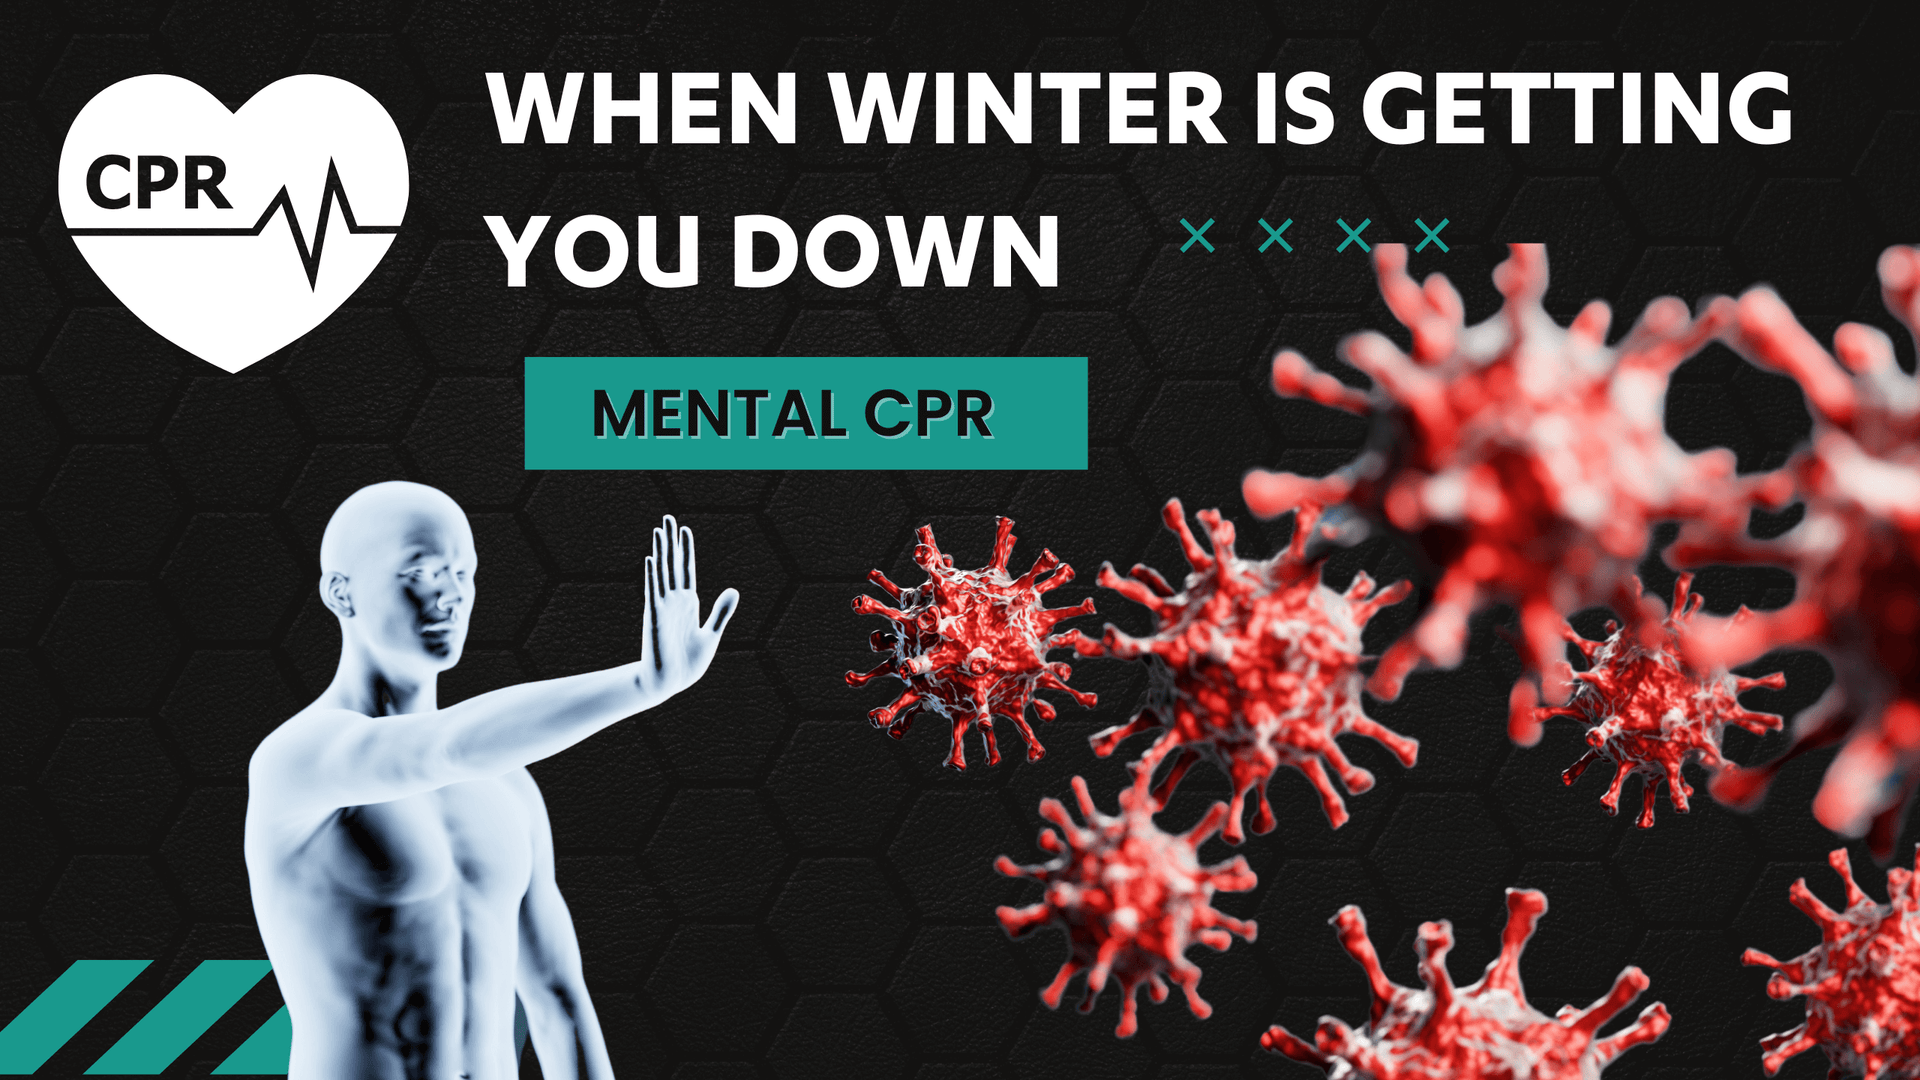 Mental CPR: When Winter Is Getting You Down